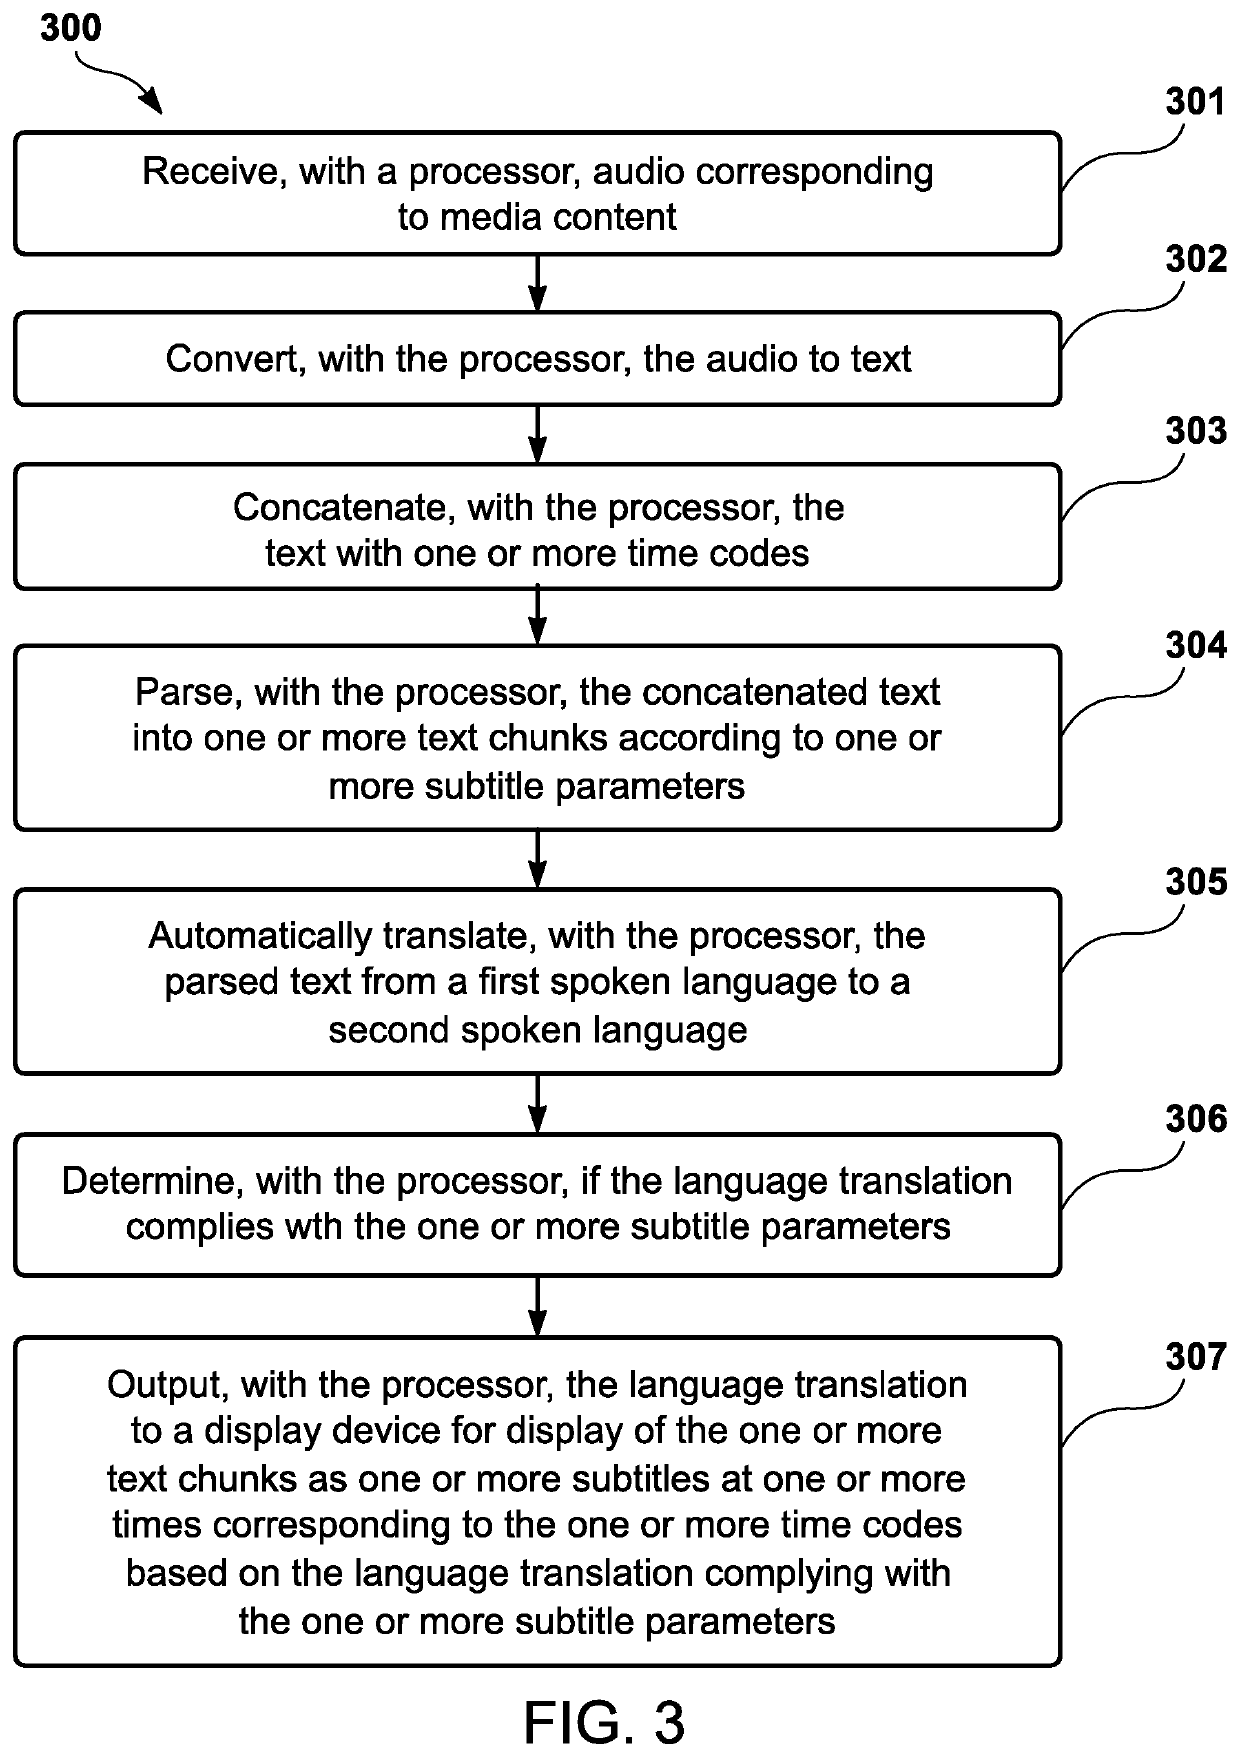 Machine translation system for entertainment and media